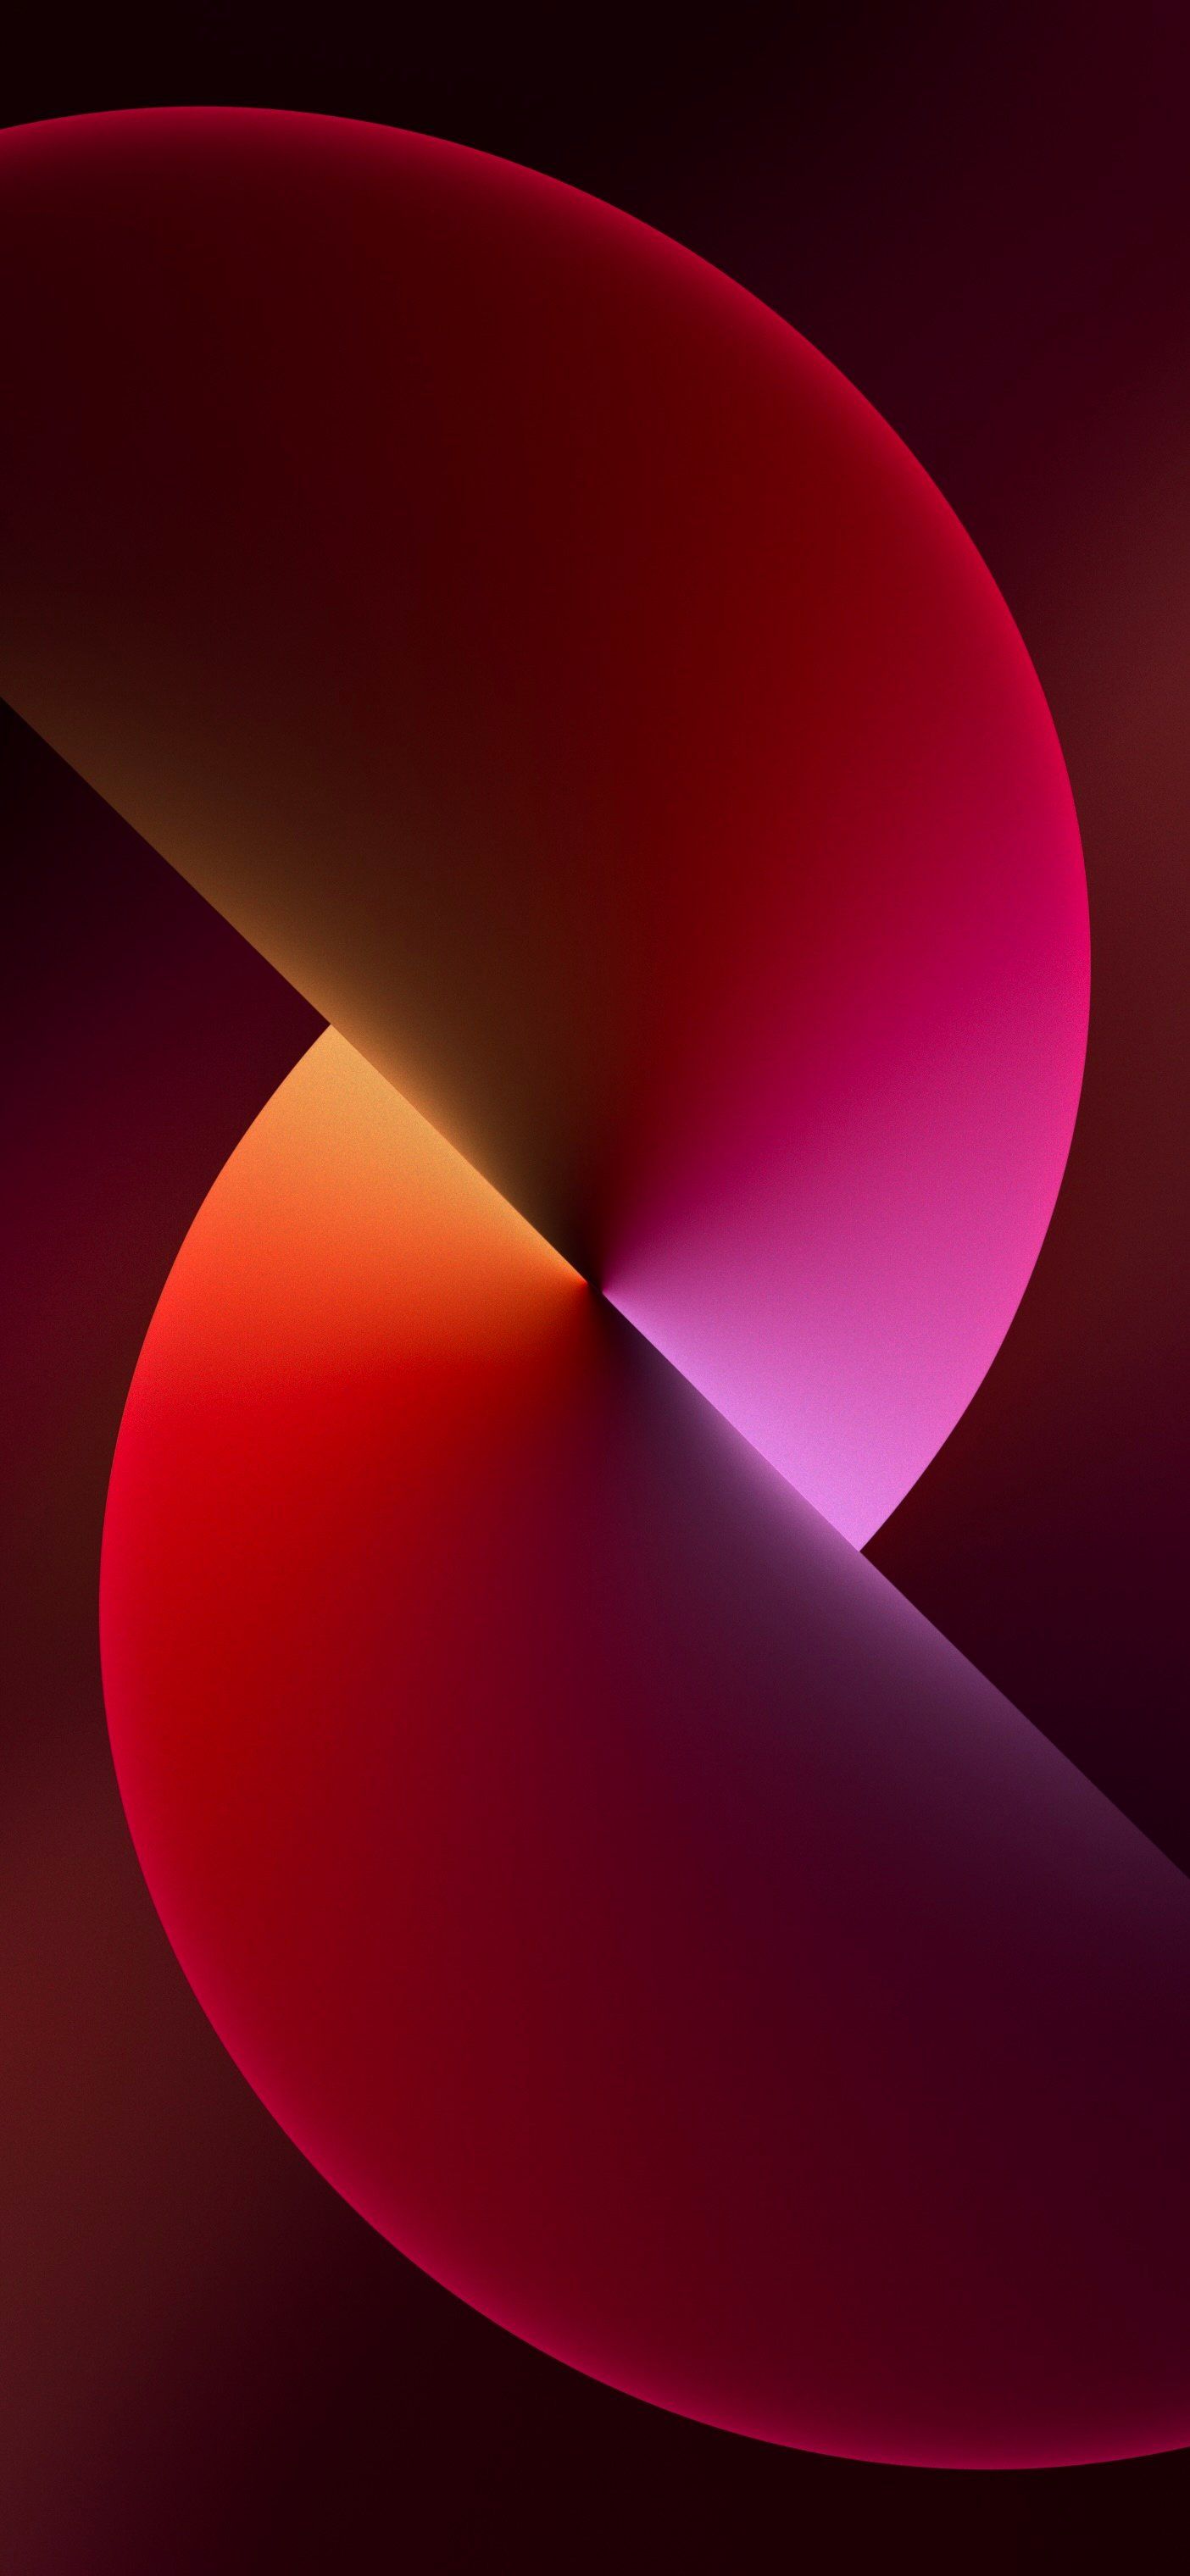 Ios 13 Wallpapers - 4K, Hd Ios 13 Backgrounds On Wallpaperbat